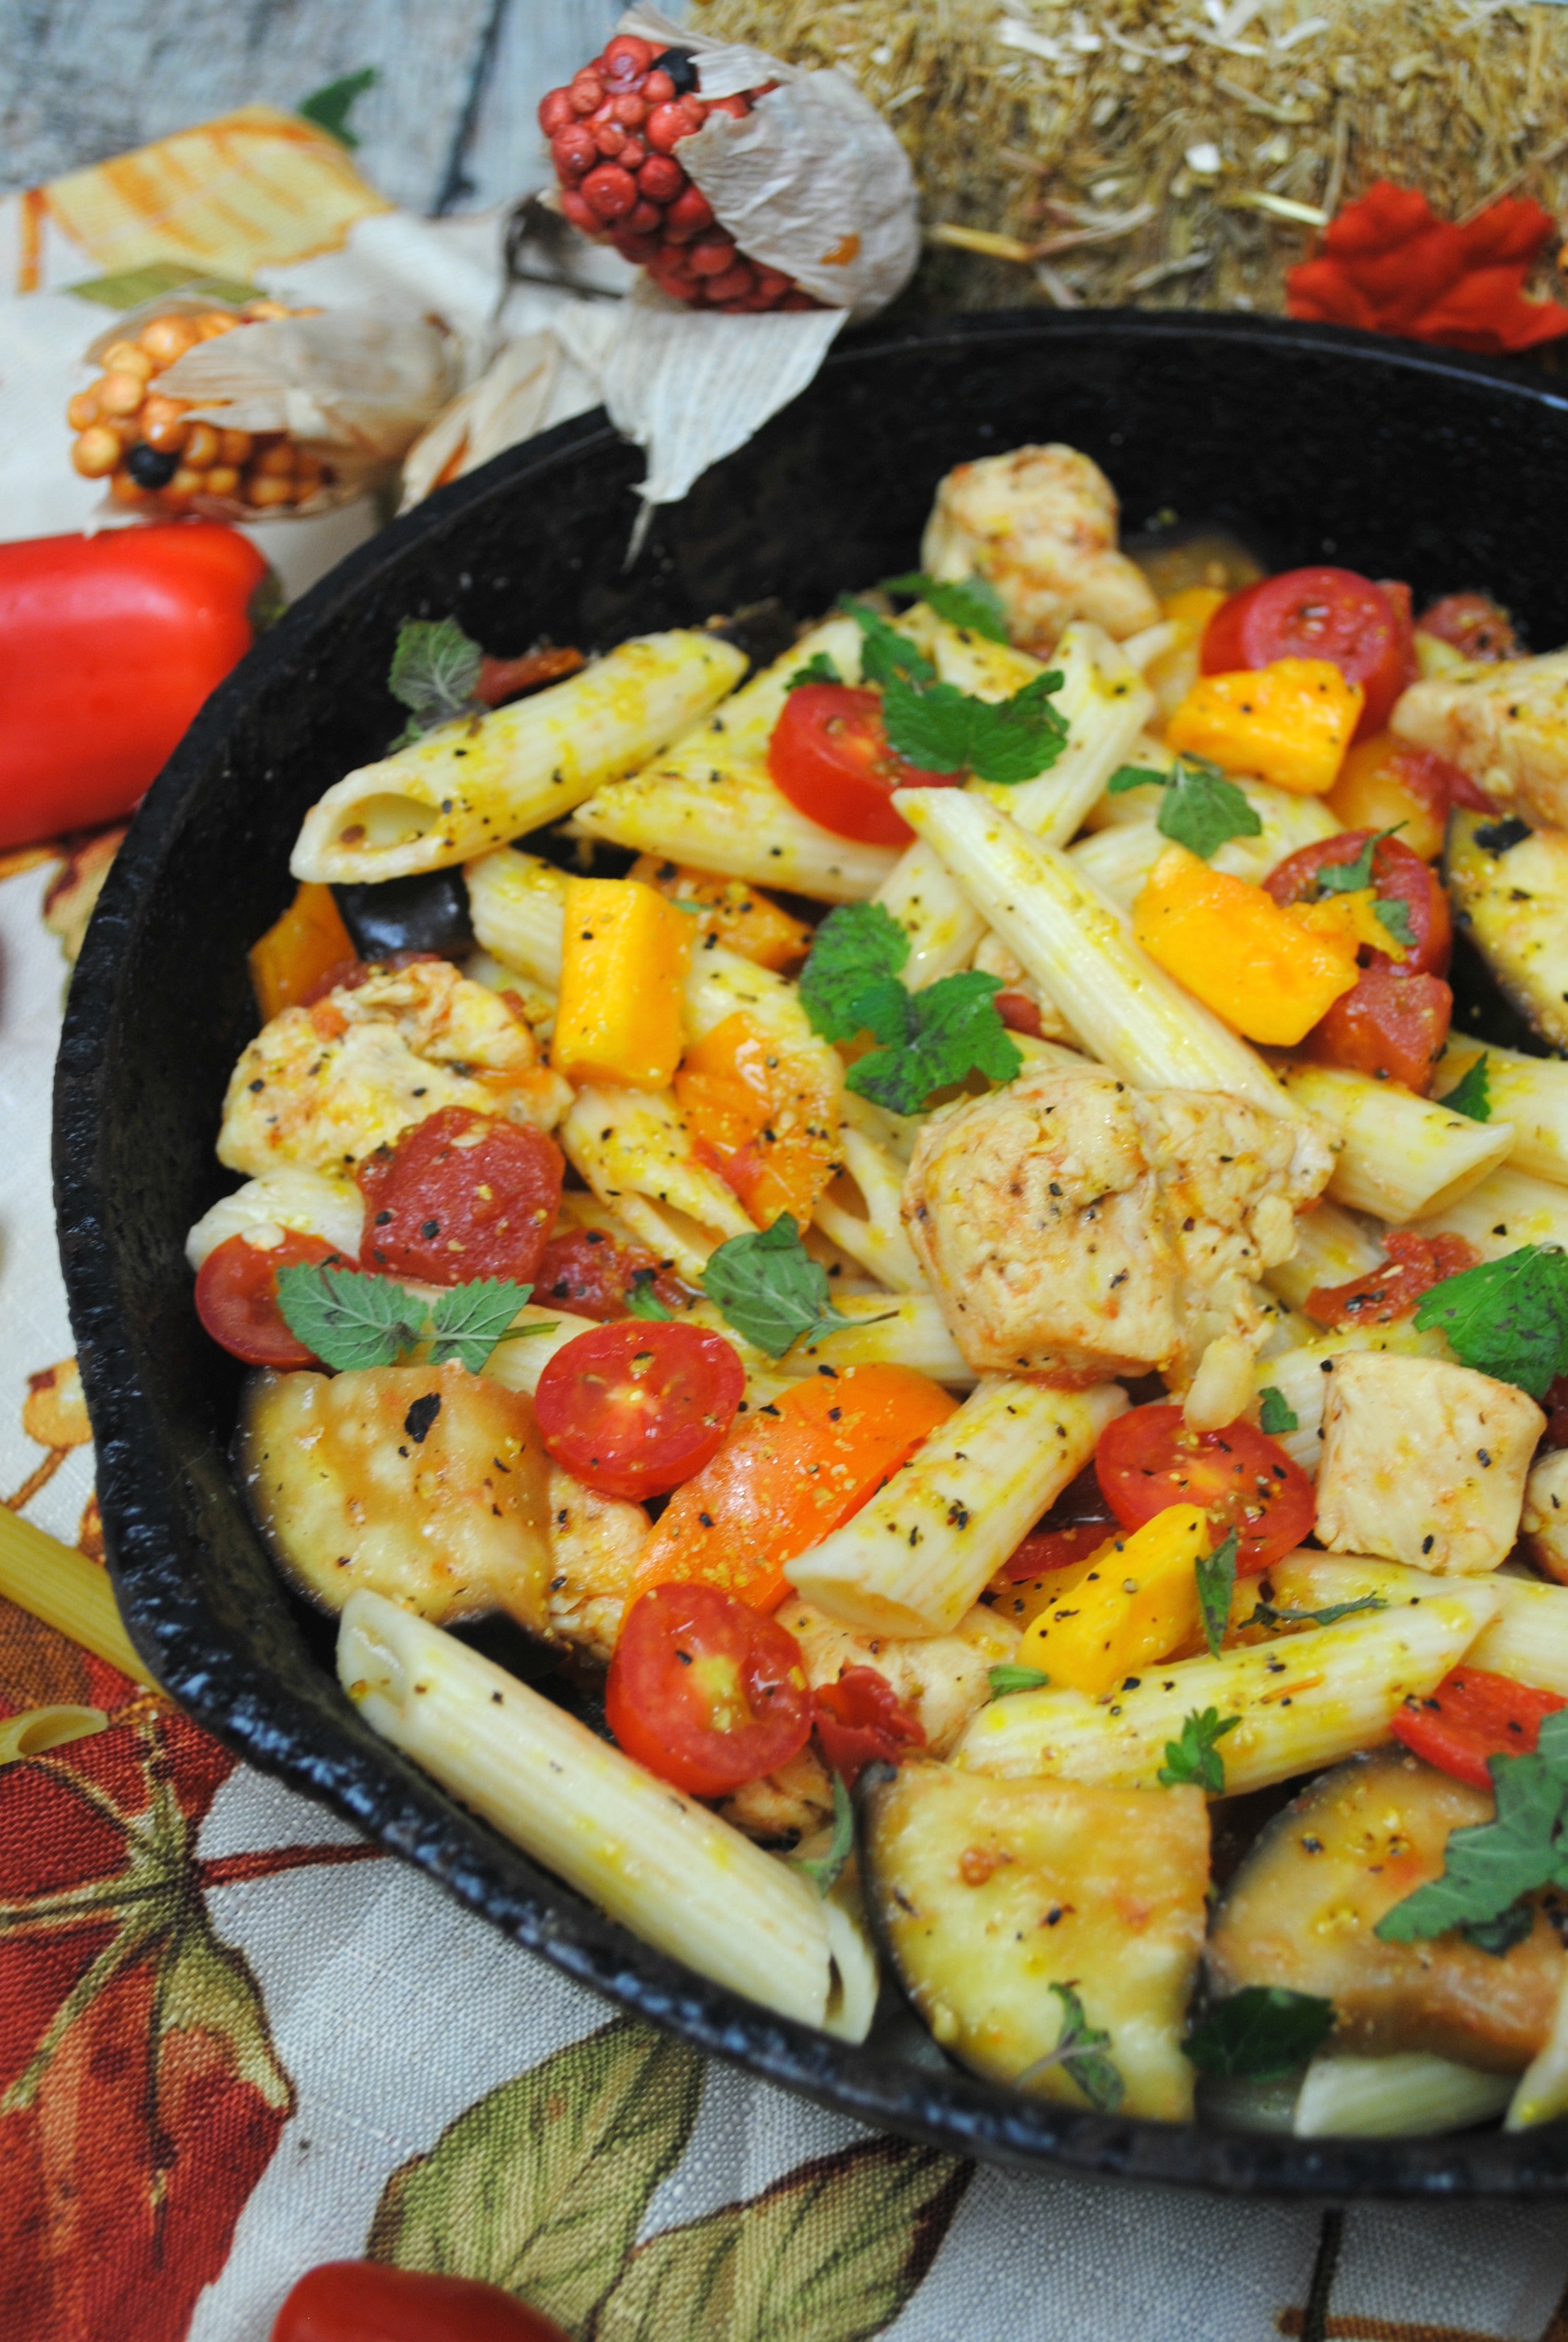 Looking for a simple skillet meal? Skillet meals are great for a quick one pan dinner. This Autumn Vegetables and Pasta Skillet Meal brings together all the flavors of fresh fall vegetables with the simplicity of skillet meals.